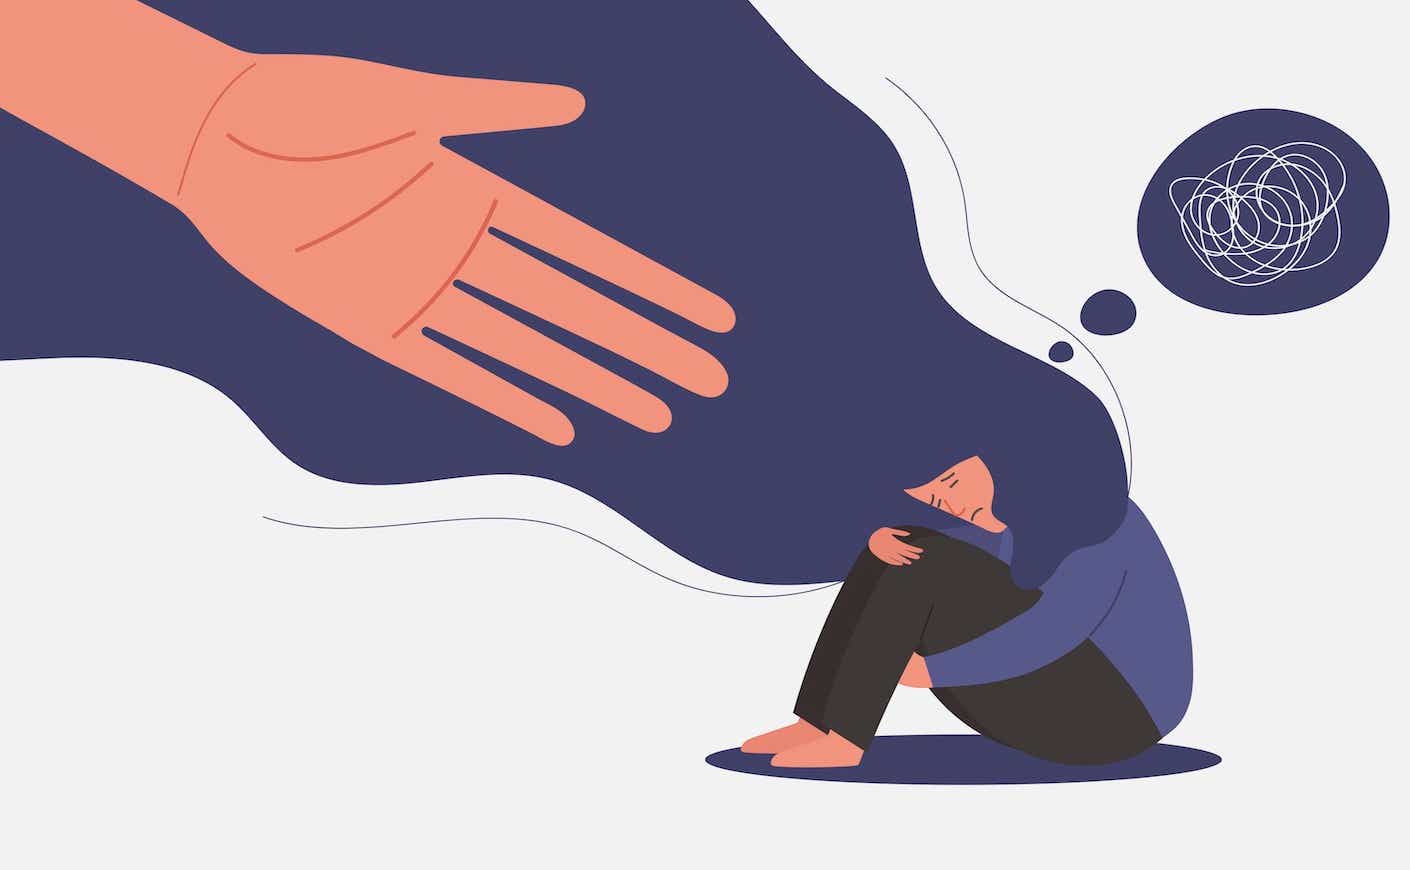 illustration of a person reaching out a person in need